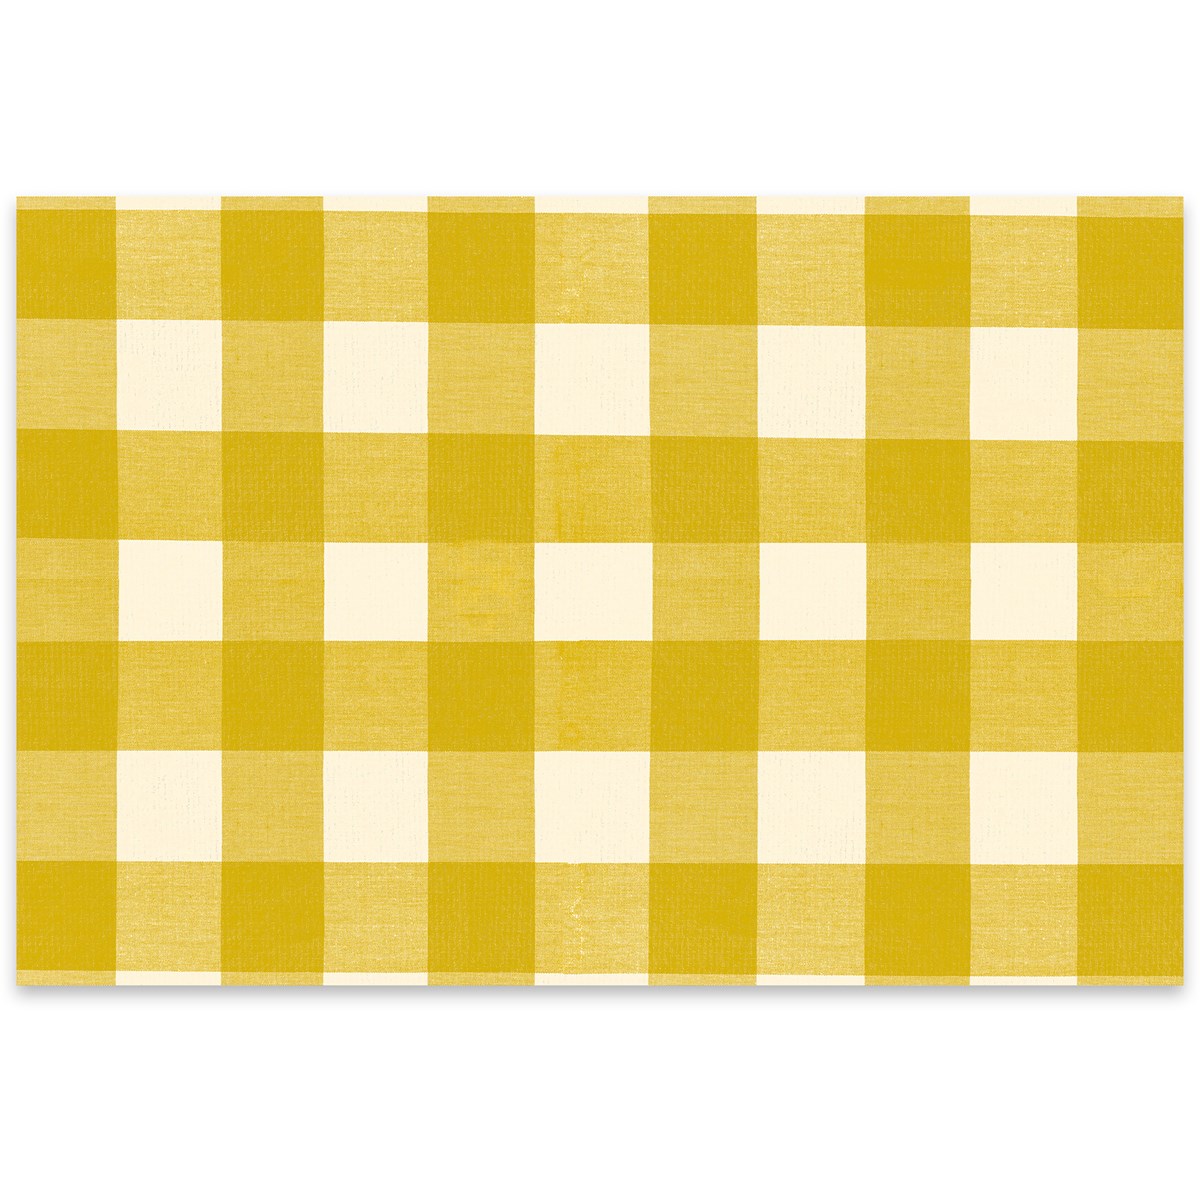 Paper Placemat Pad - Gold Buffalo Check - 17.50" x 12" - Paper